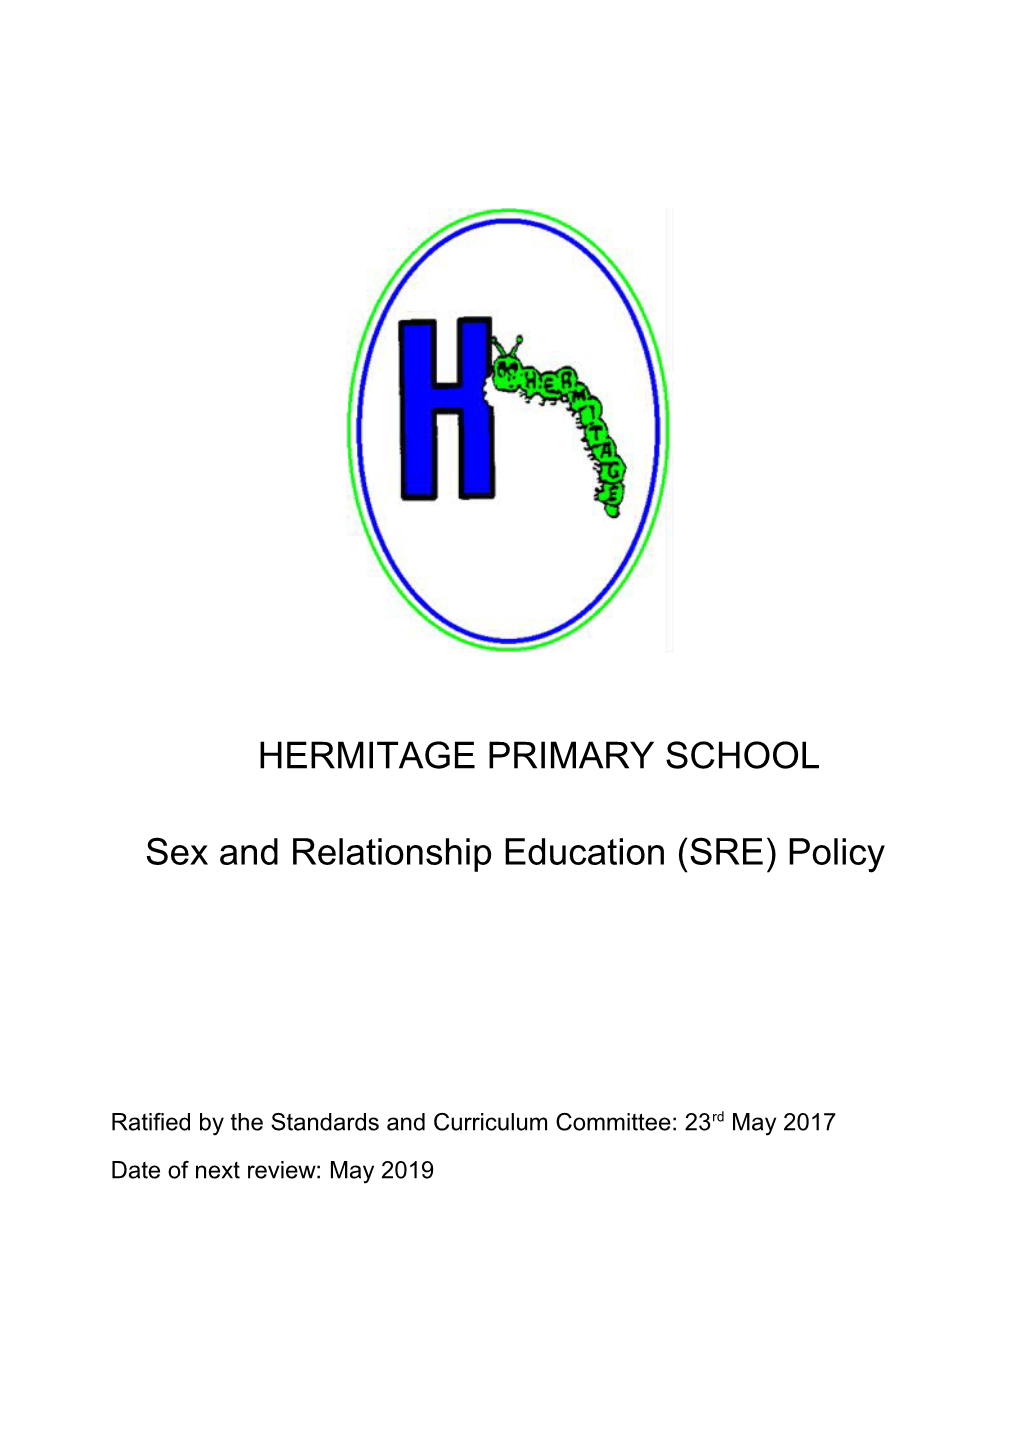 Sex and Relationship Education (SRE) Policy